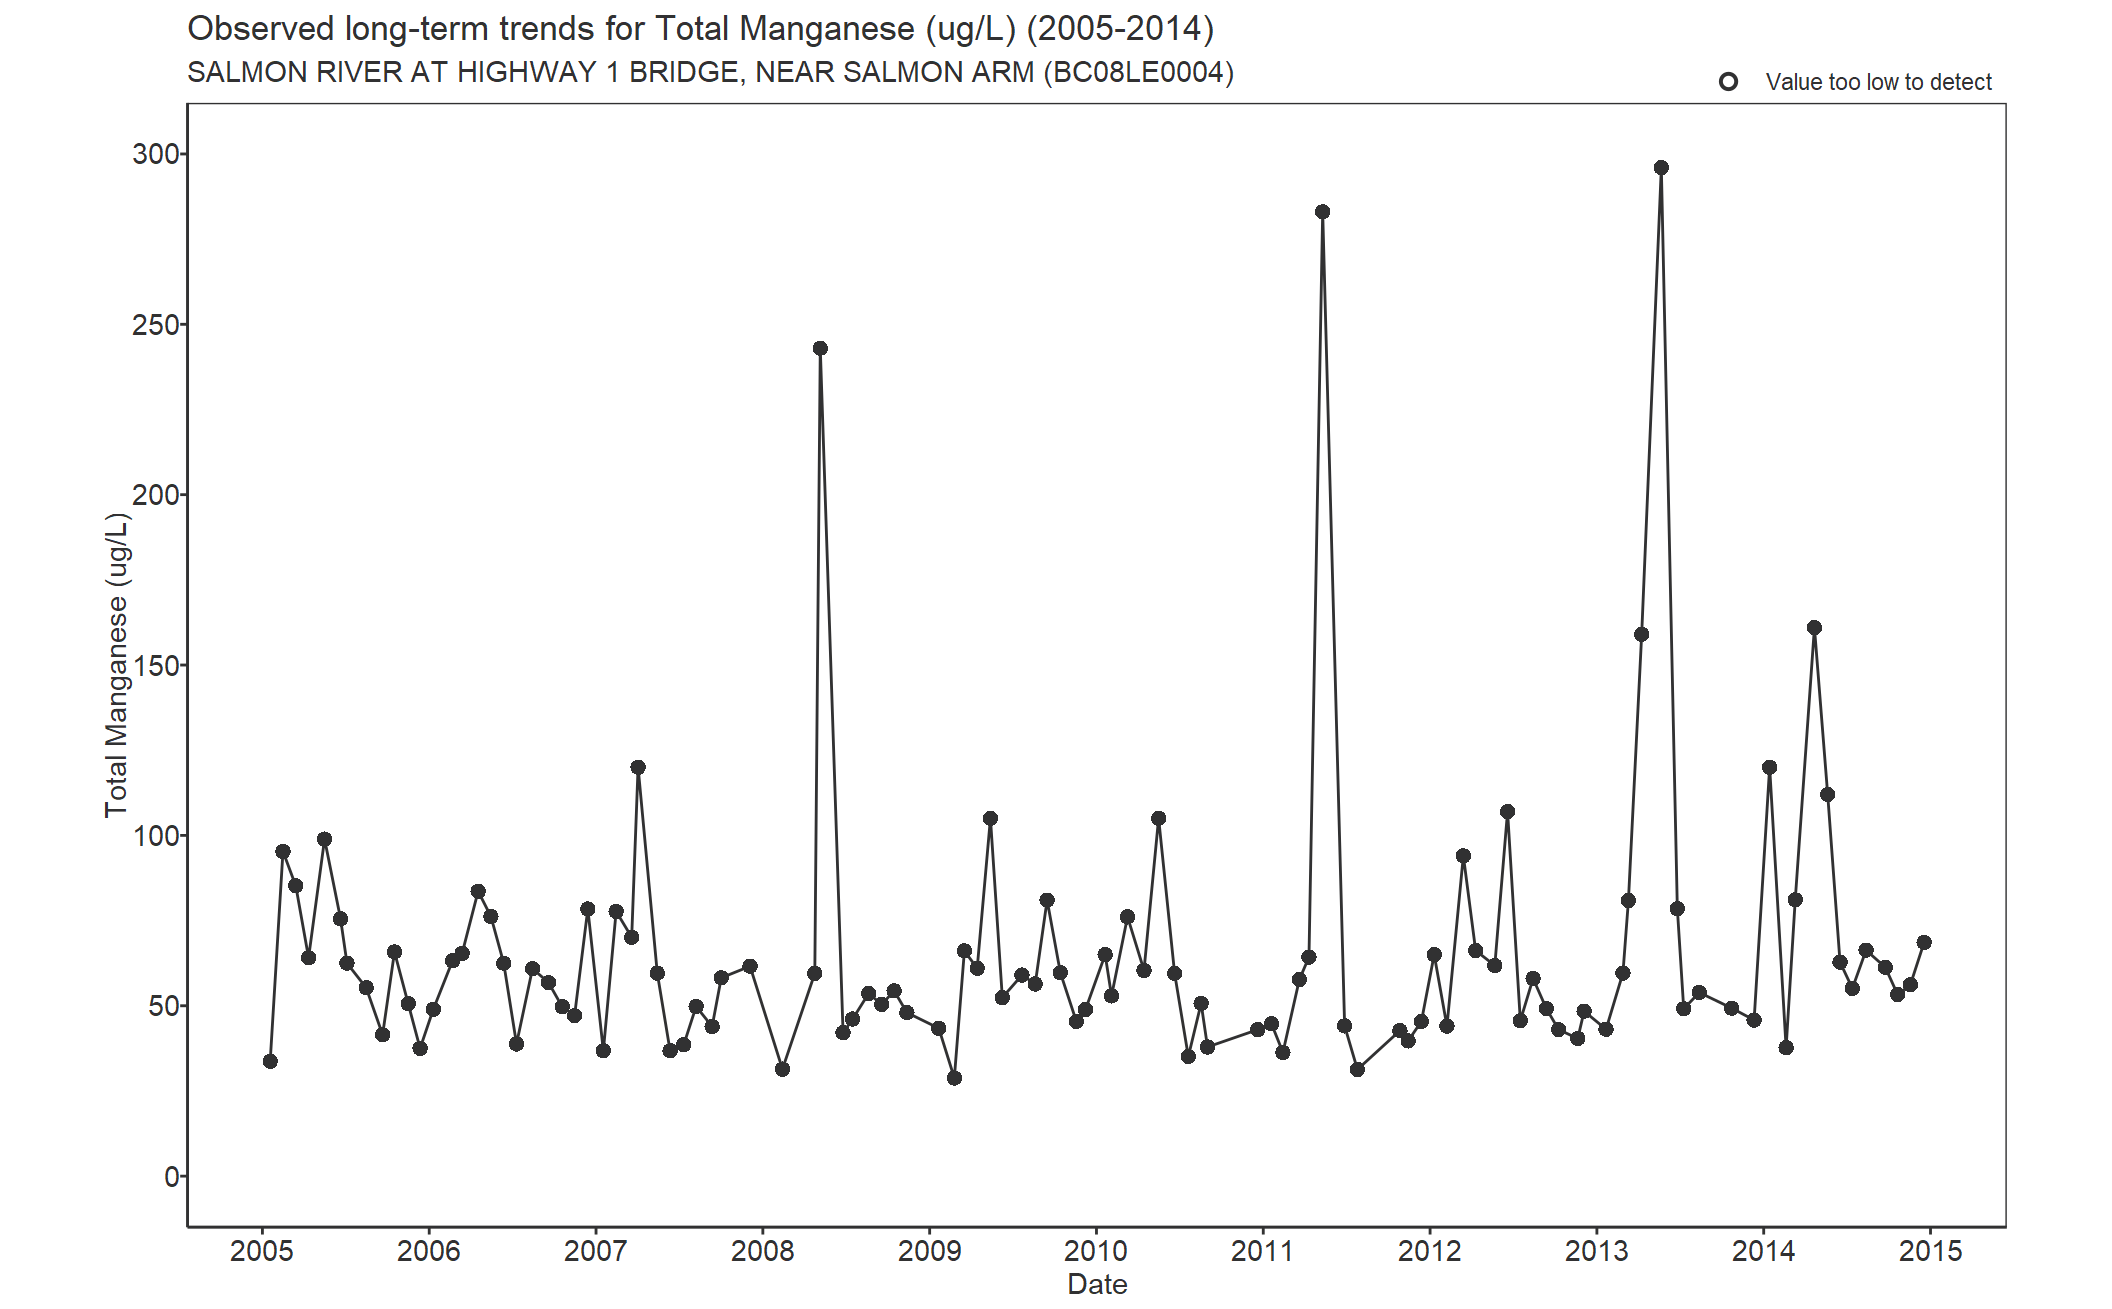 Observed long-term trends for Manganese Total (2005-2014)